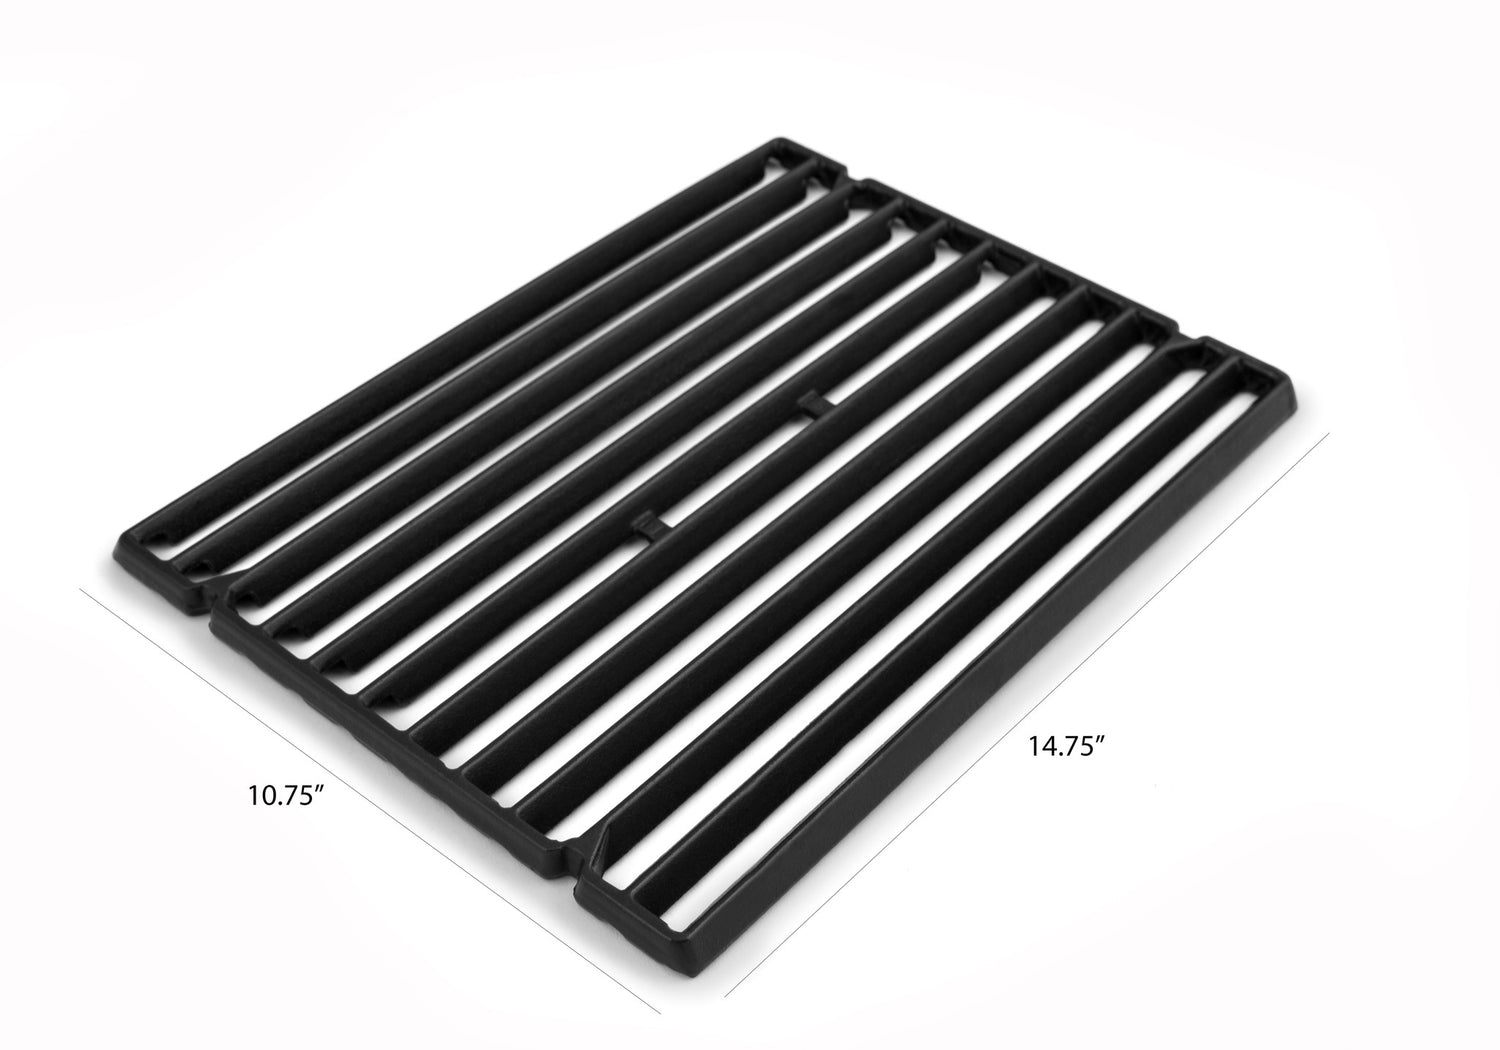 Broil King 11222 Replacement Cast Iron Cooking Grills with Dimensions | Barbecues Galore: Burlington, Oakville, Etobicoke & Calgary